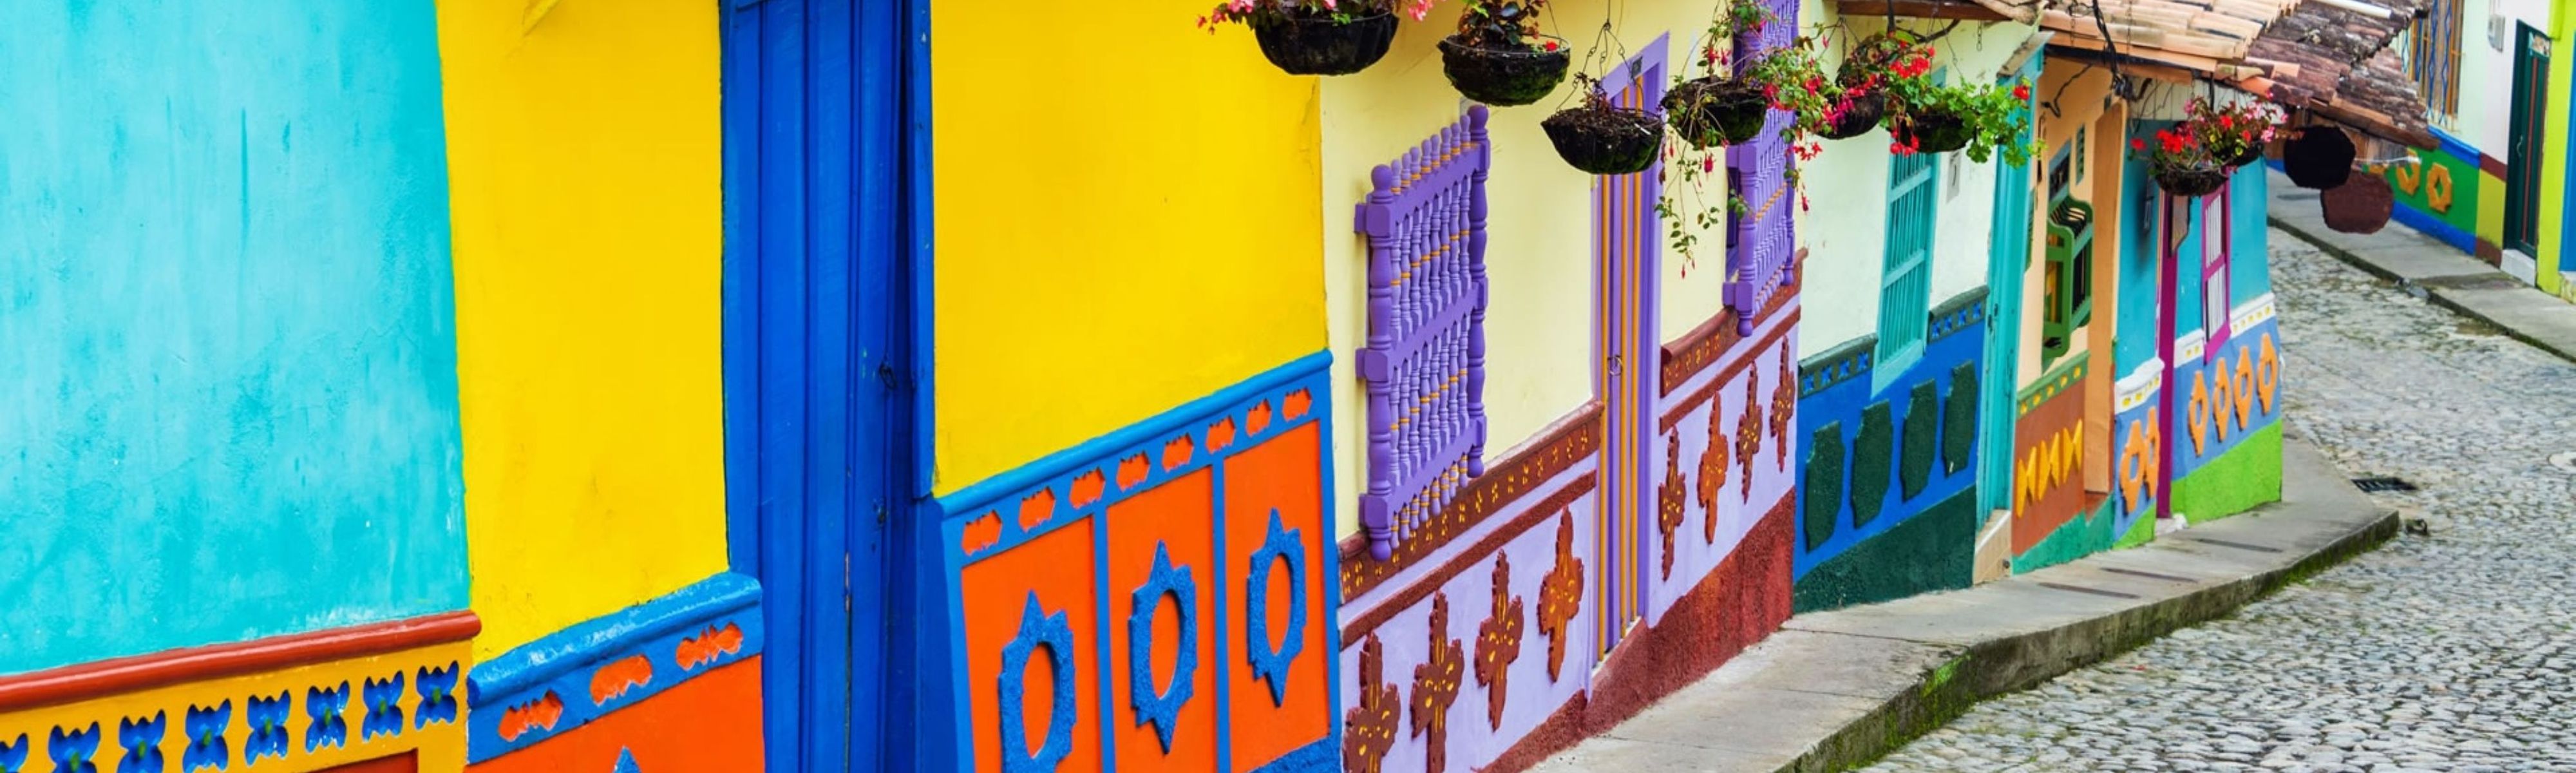 colorful painted buildings on street in colombia